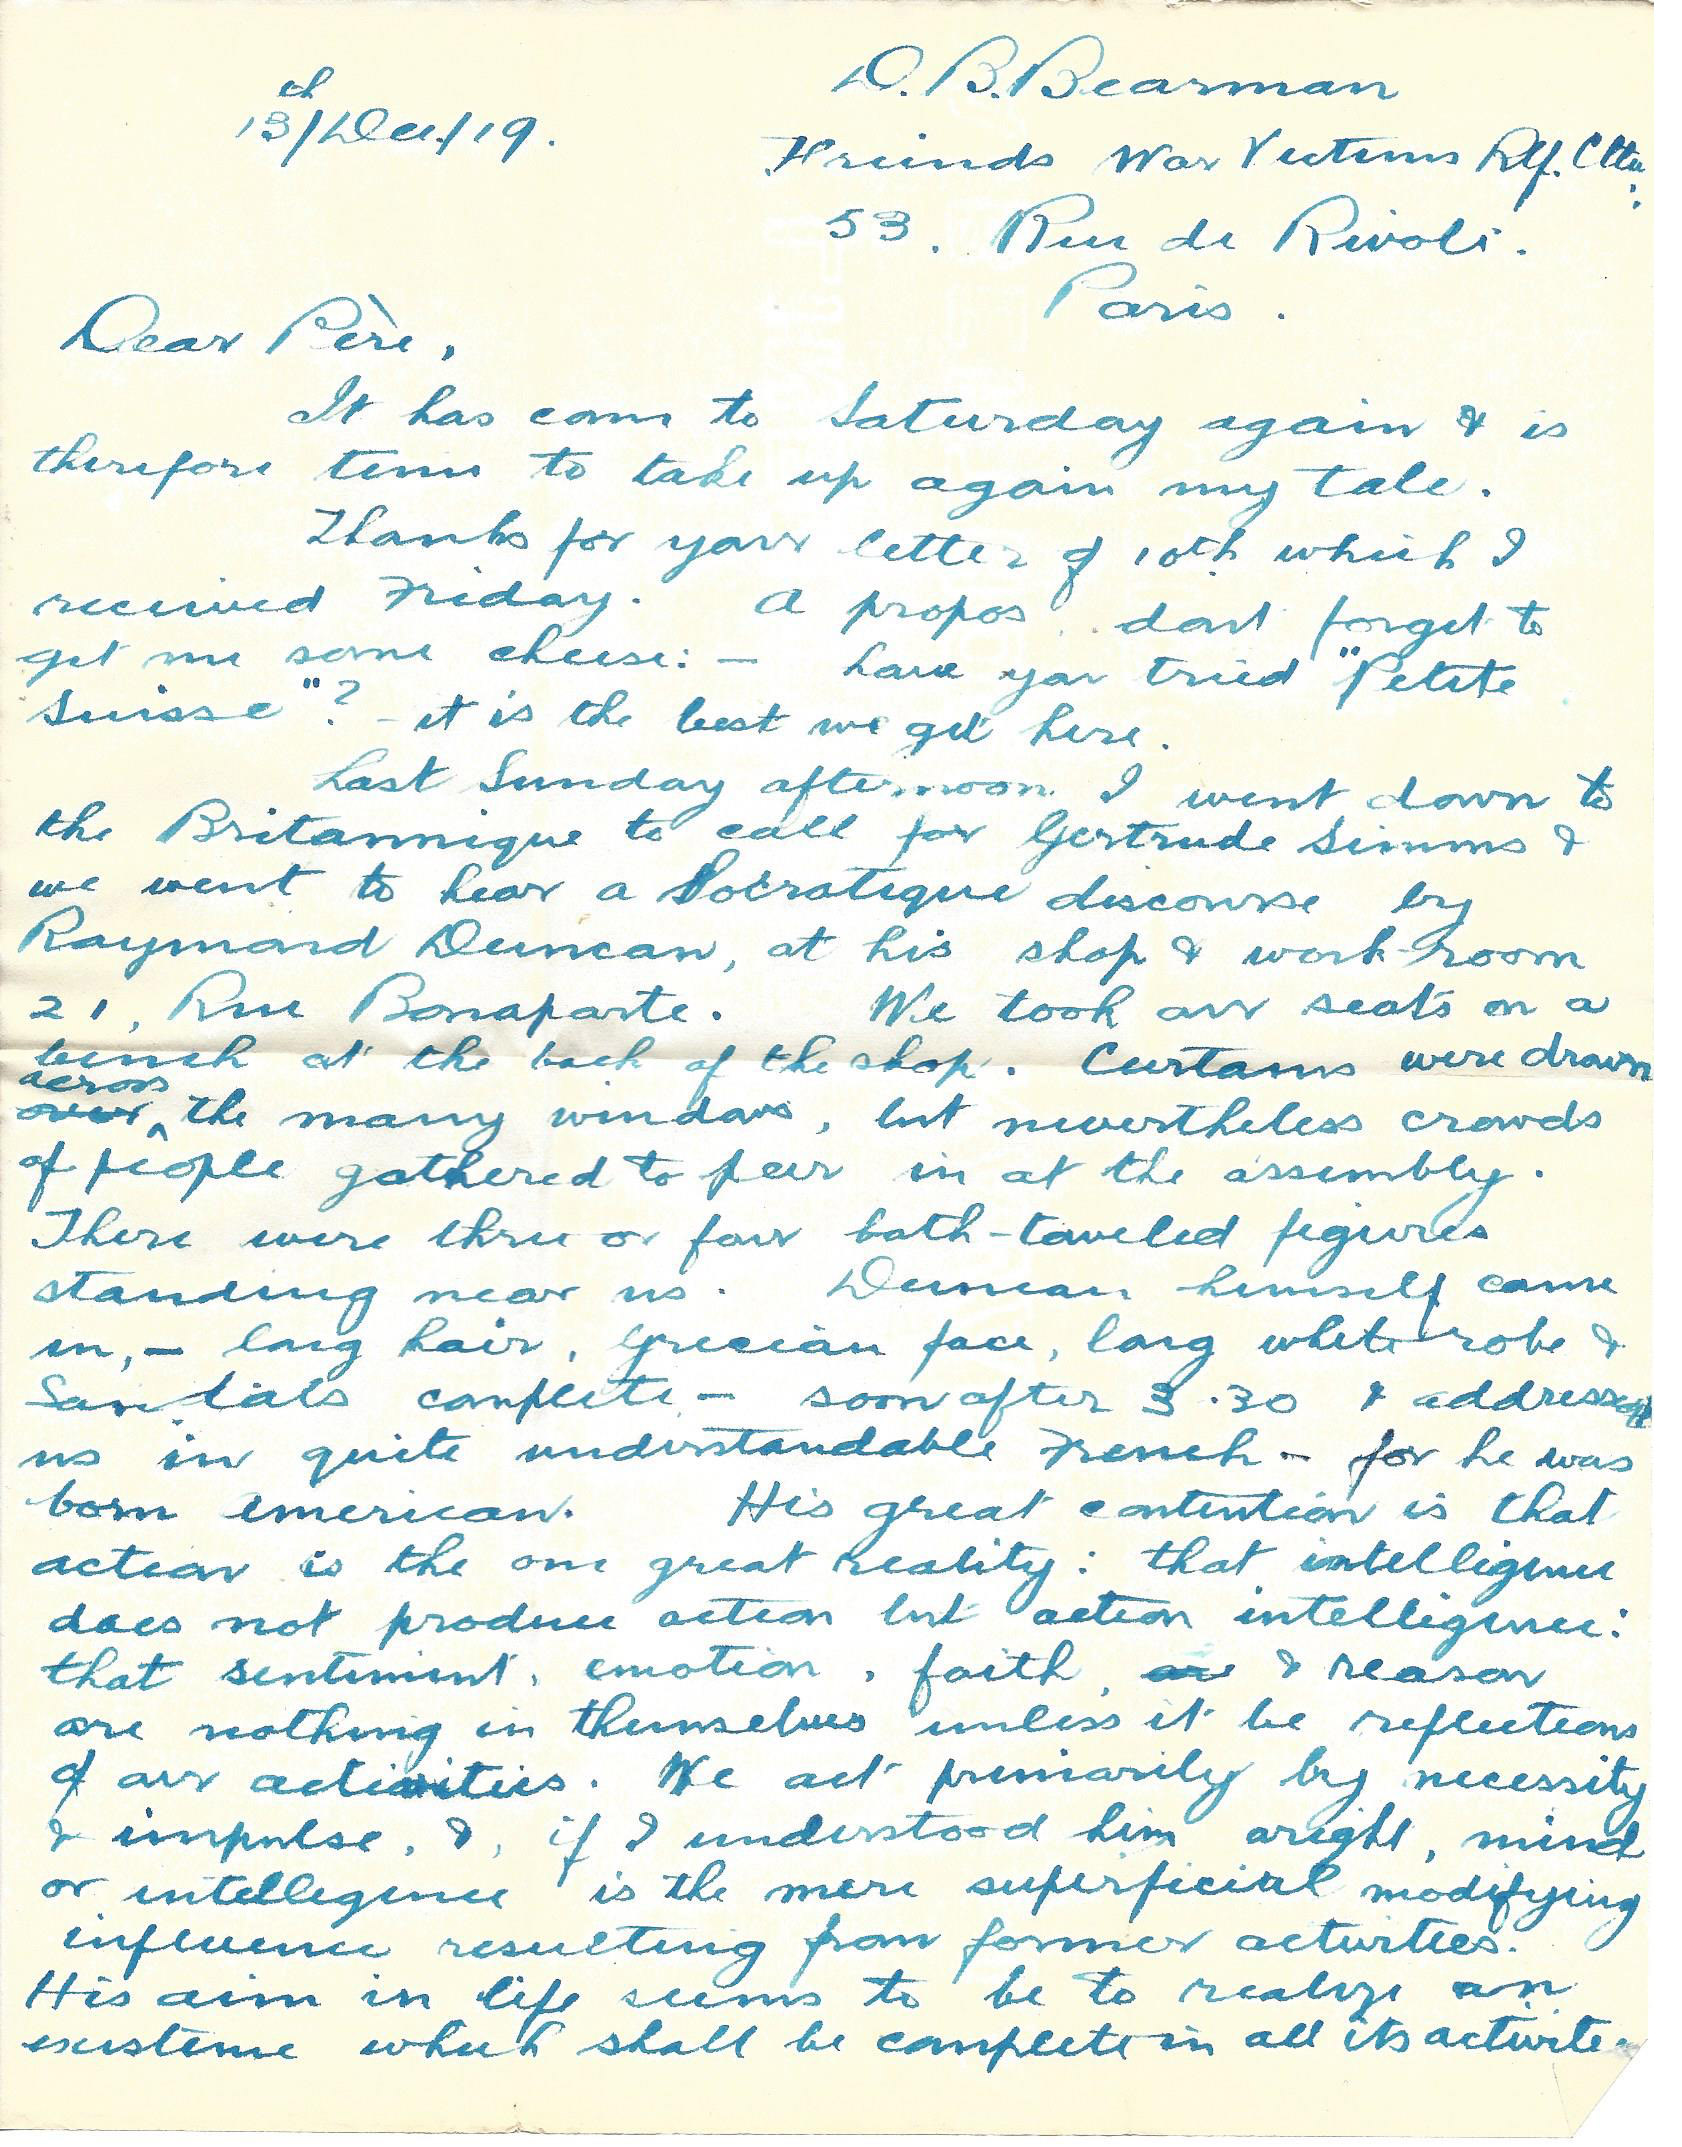 1919-12-13 Page 1 letter by Donald Bearman